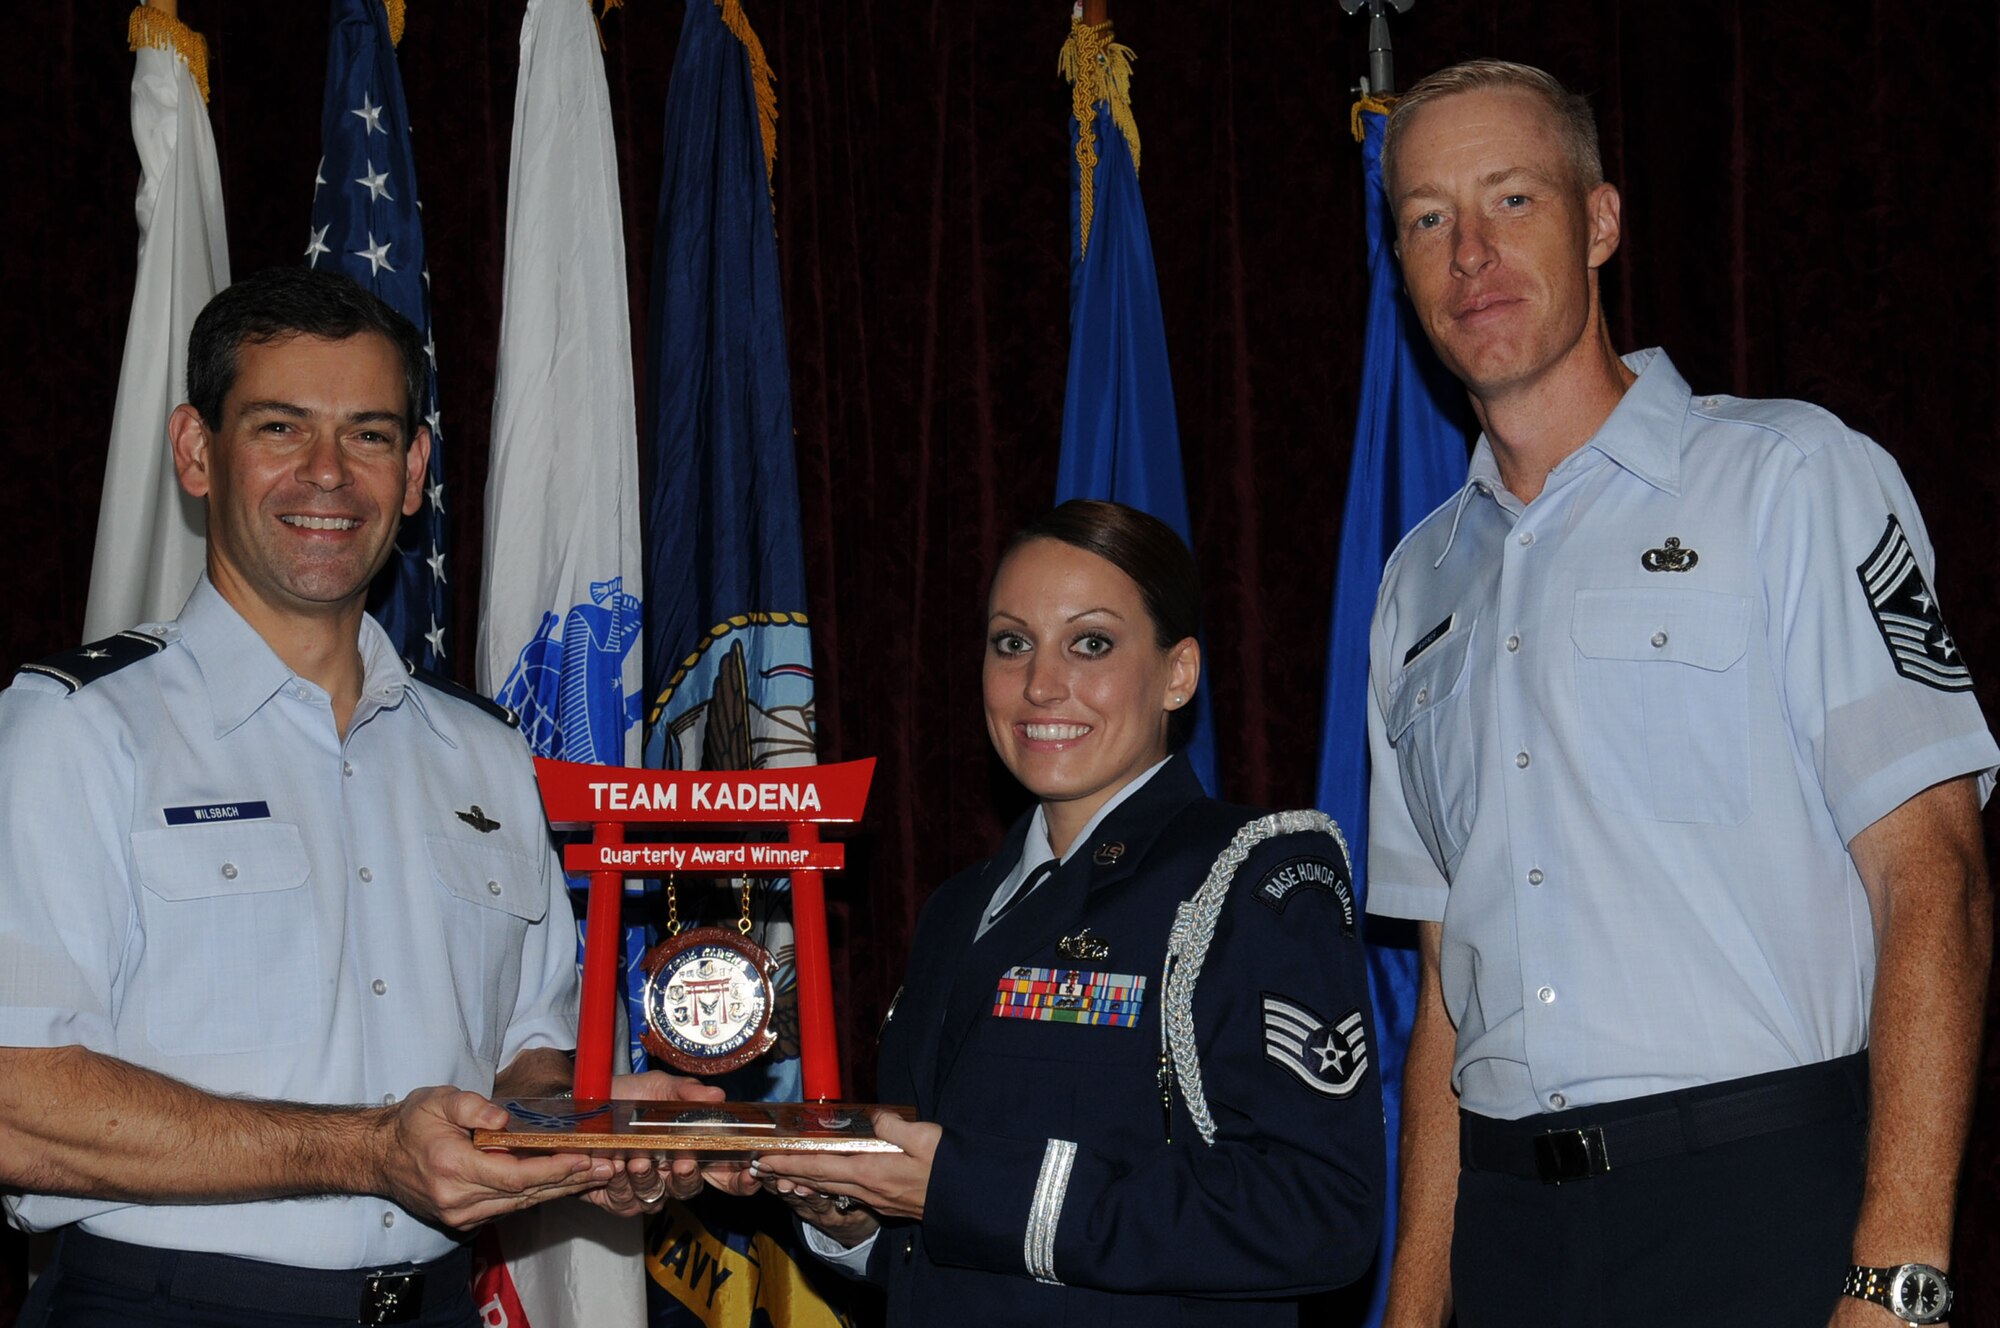 Staff Sgt. Lacey Brown, 18th Force Support Squadron, was named the Team Kadena Honor Guard NCO of the Quarter.